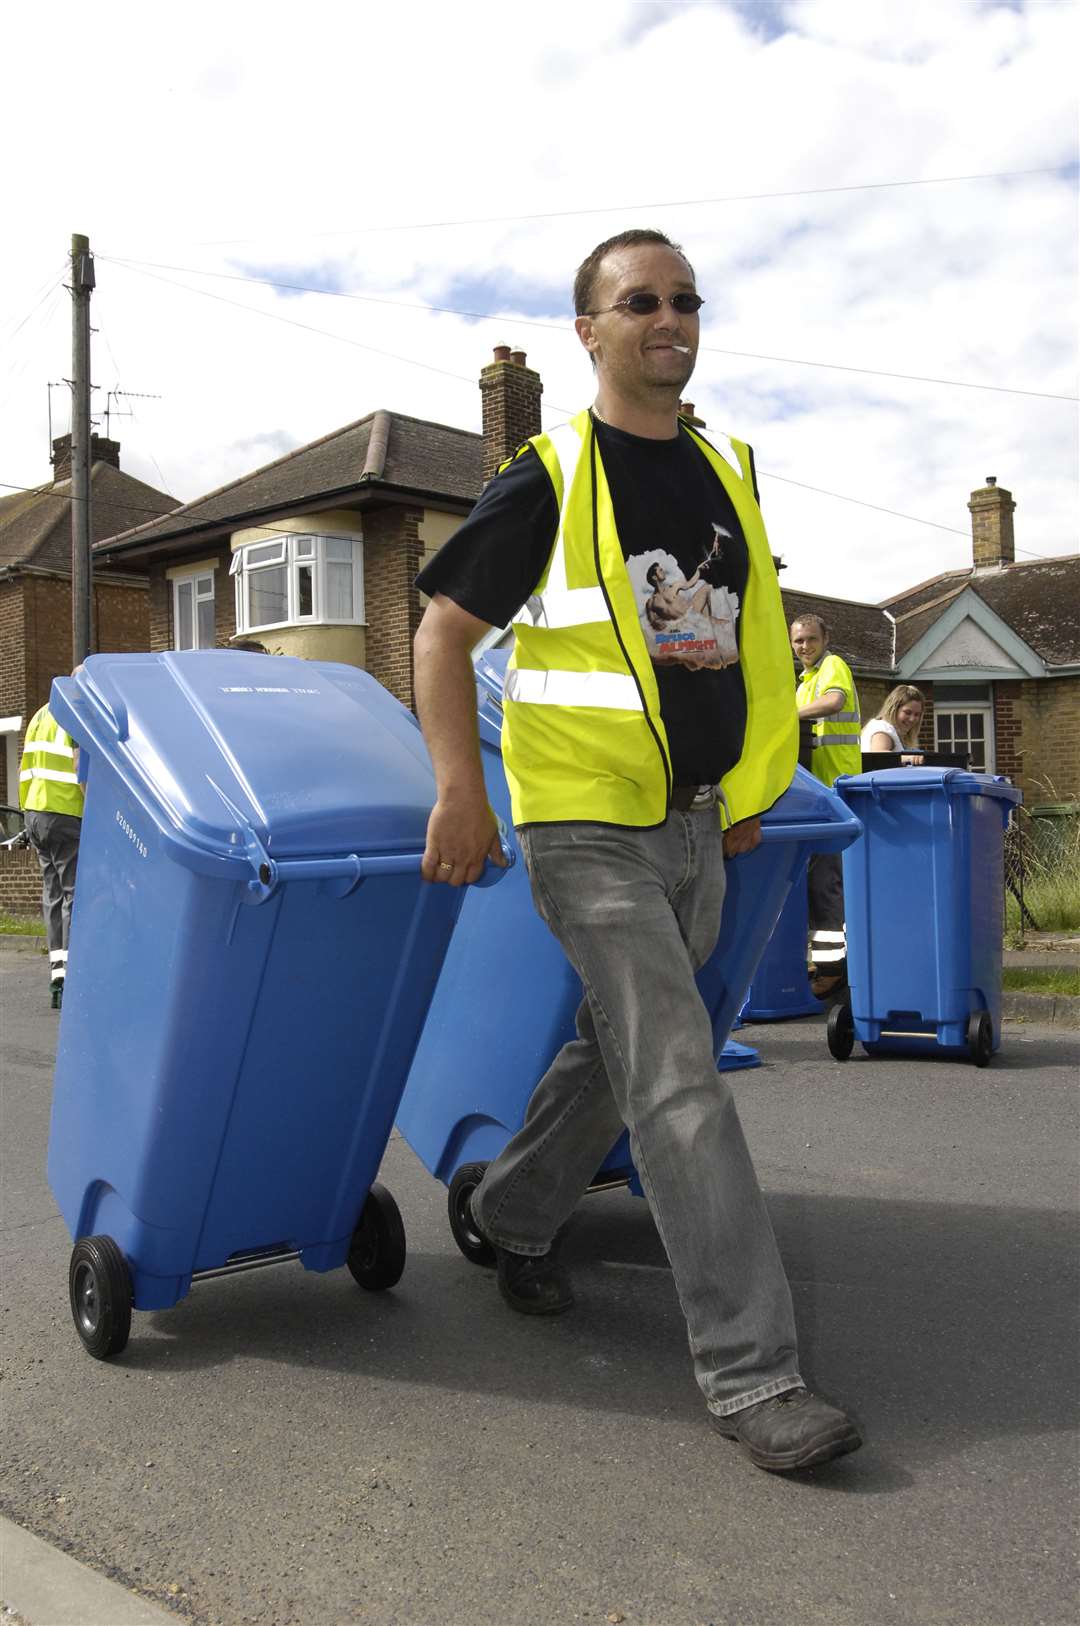 More than 120,000 stickers were placed on bins in Swale